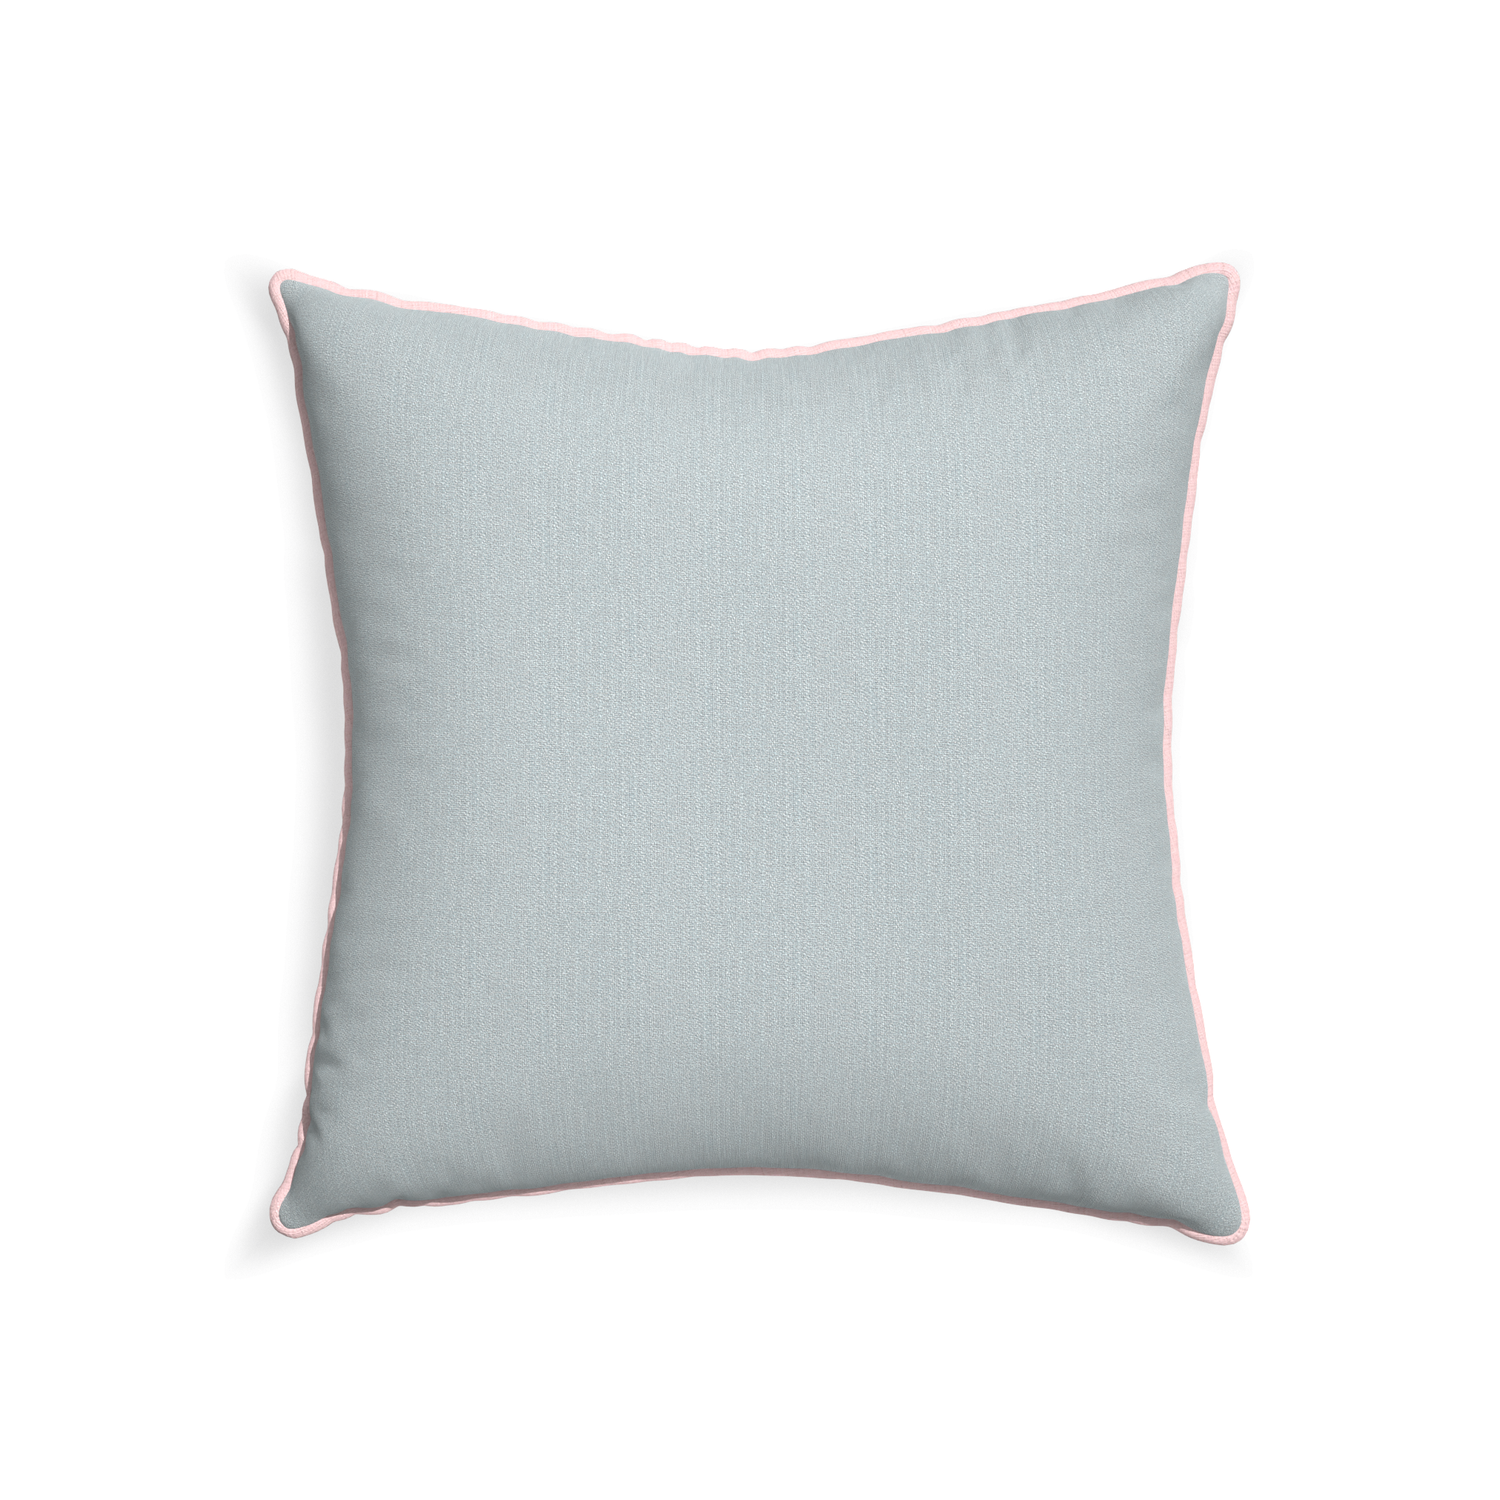 22-square sea custom grey bluepillow with petal piping on white background